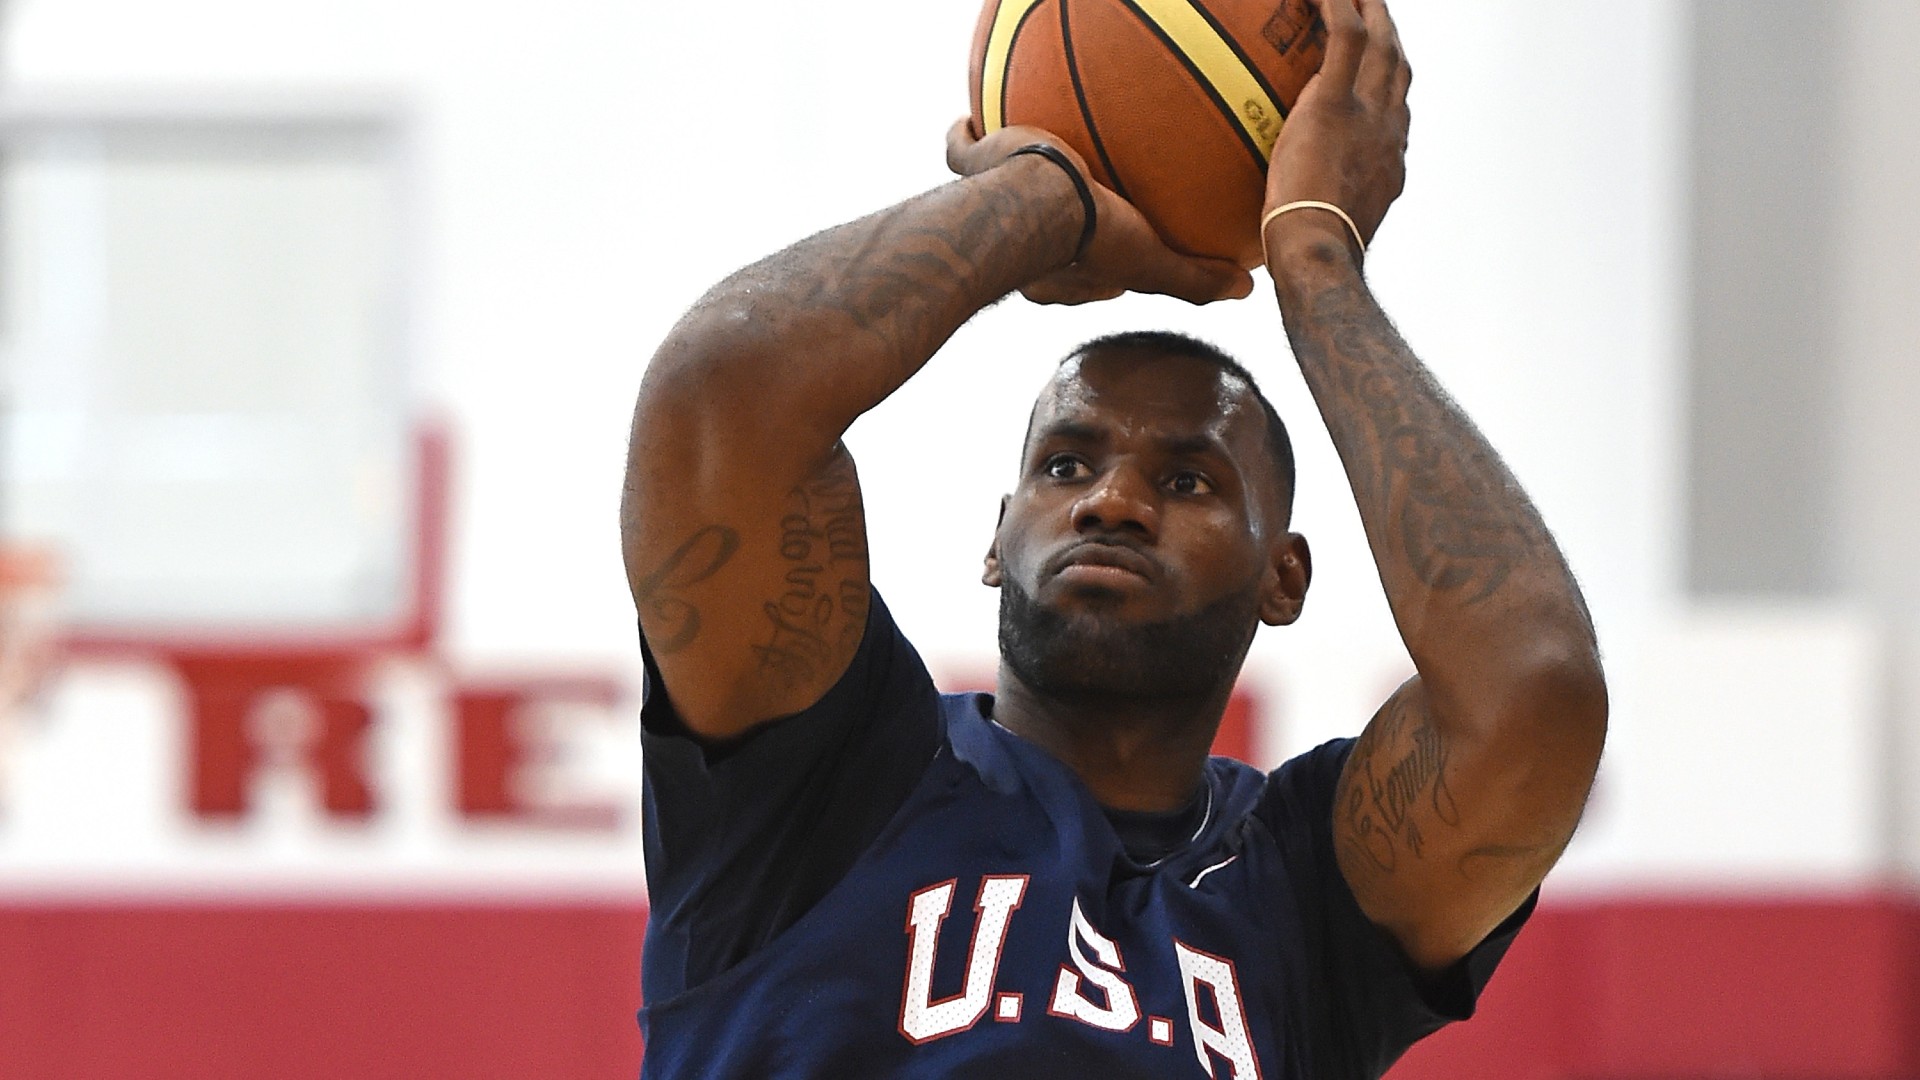 Photo of Team USA’s Jerry Colangelo says LeBron James’ Olympic career may be over